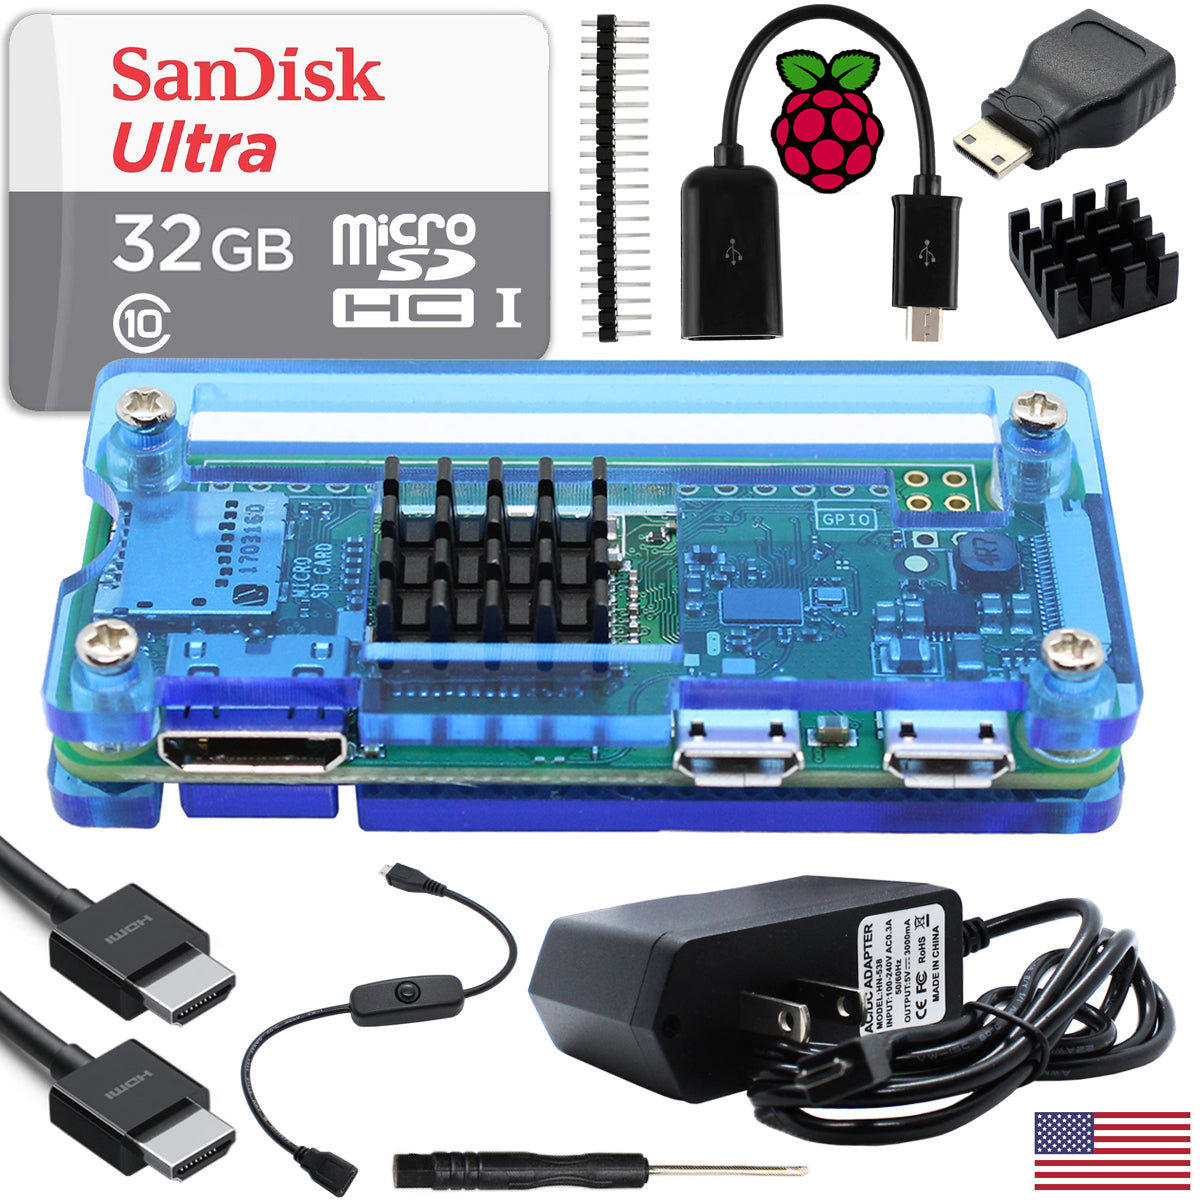 Essential Kit for Raspberry Pi Zero 2 W | 128GB Ultra Preloaded Card | Protective Case | Power Supply | On/Off Switch Cable | 20Pin GPIO Header | Heatsink | Compatible with Pi Zero 2 W, 1.3, W